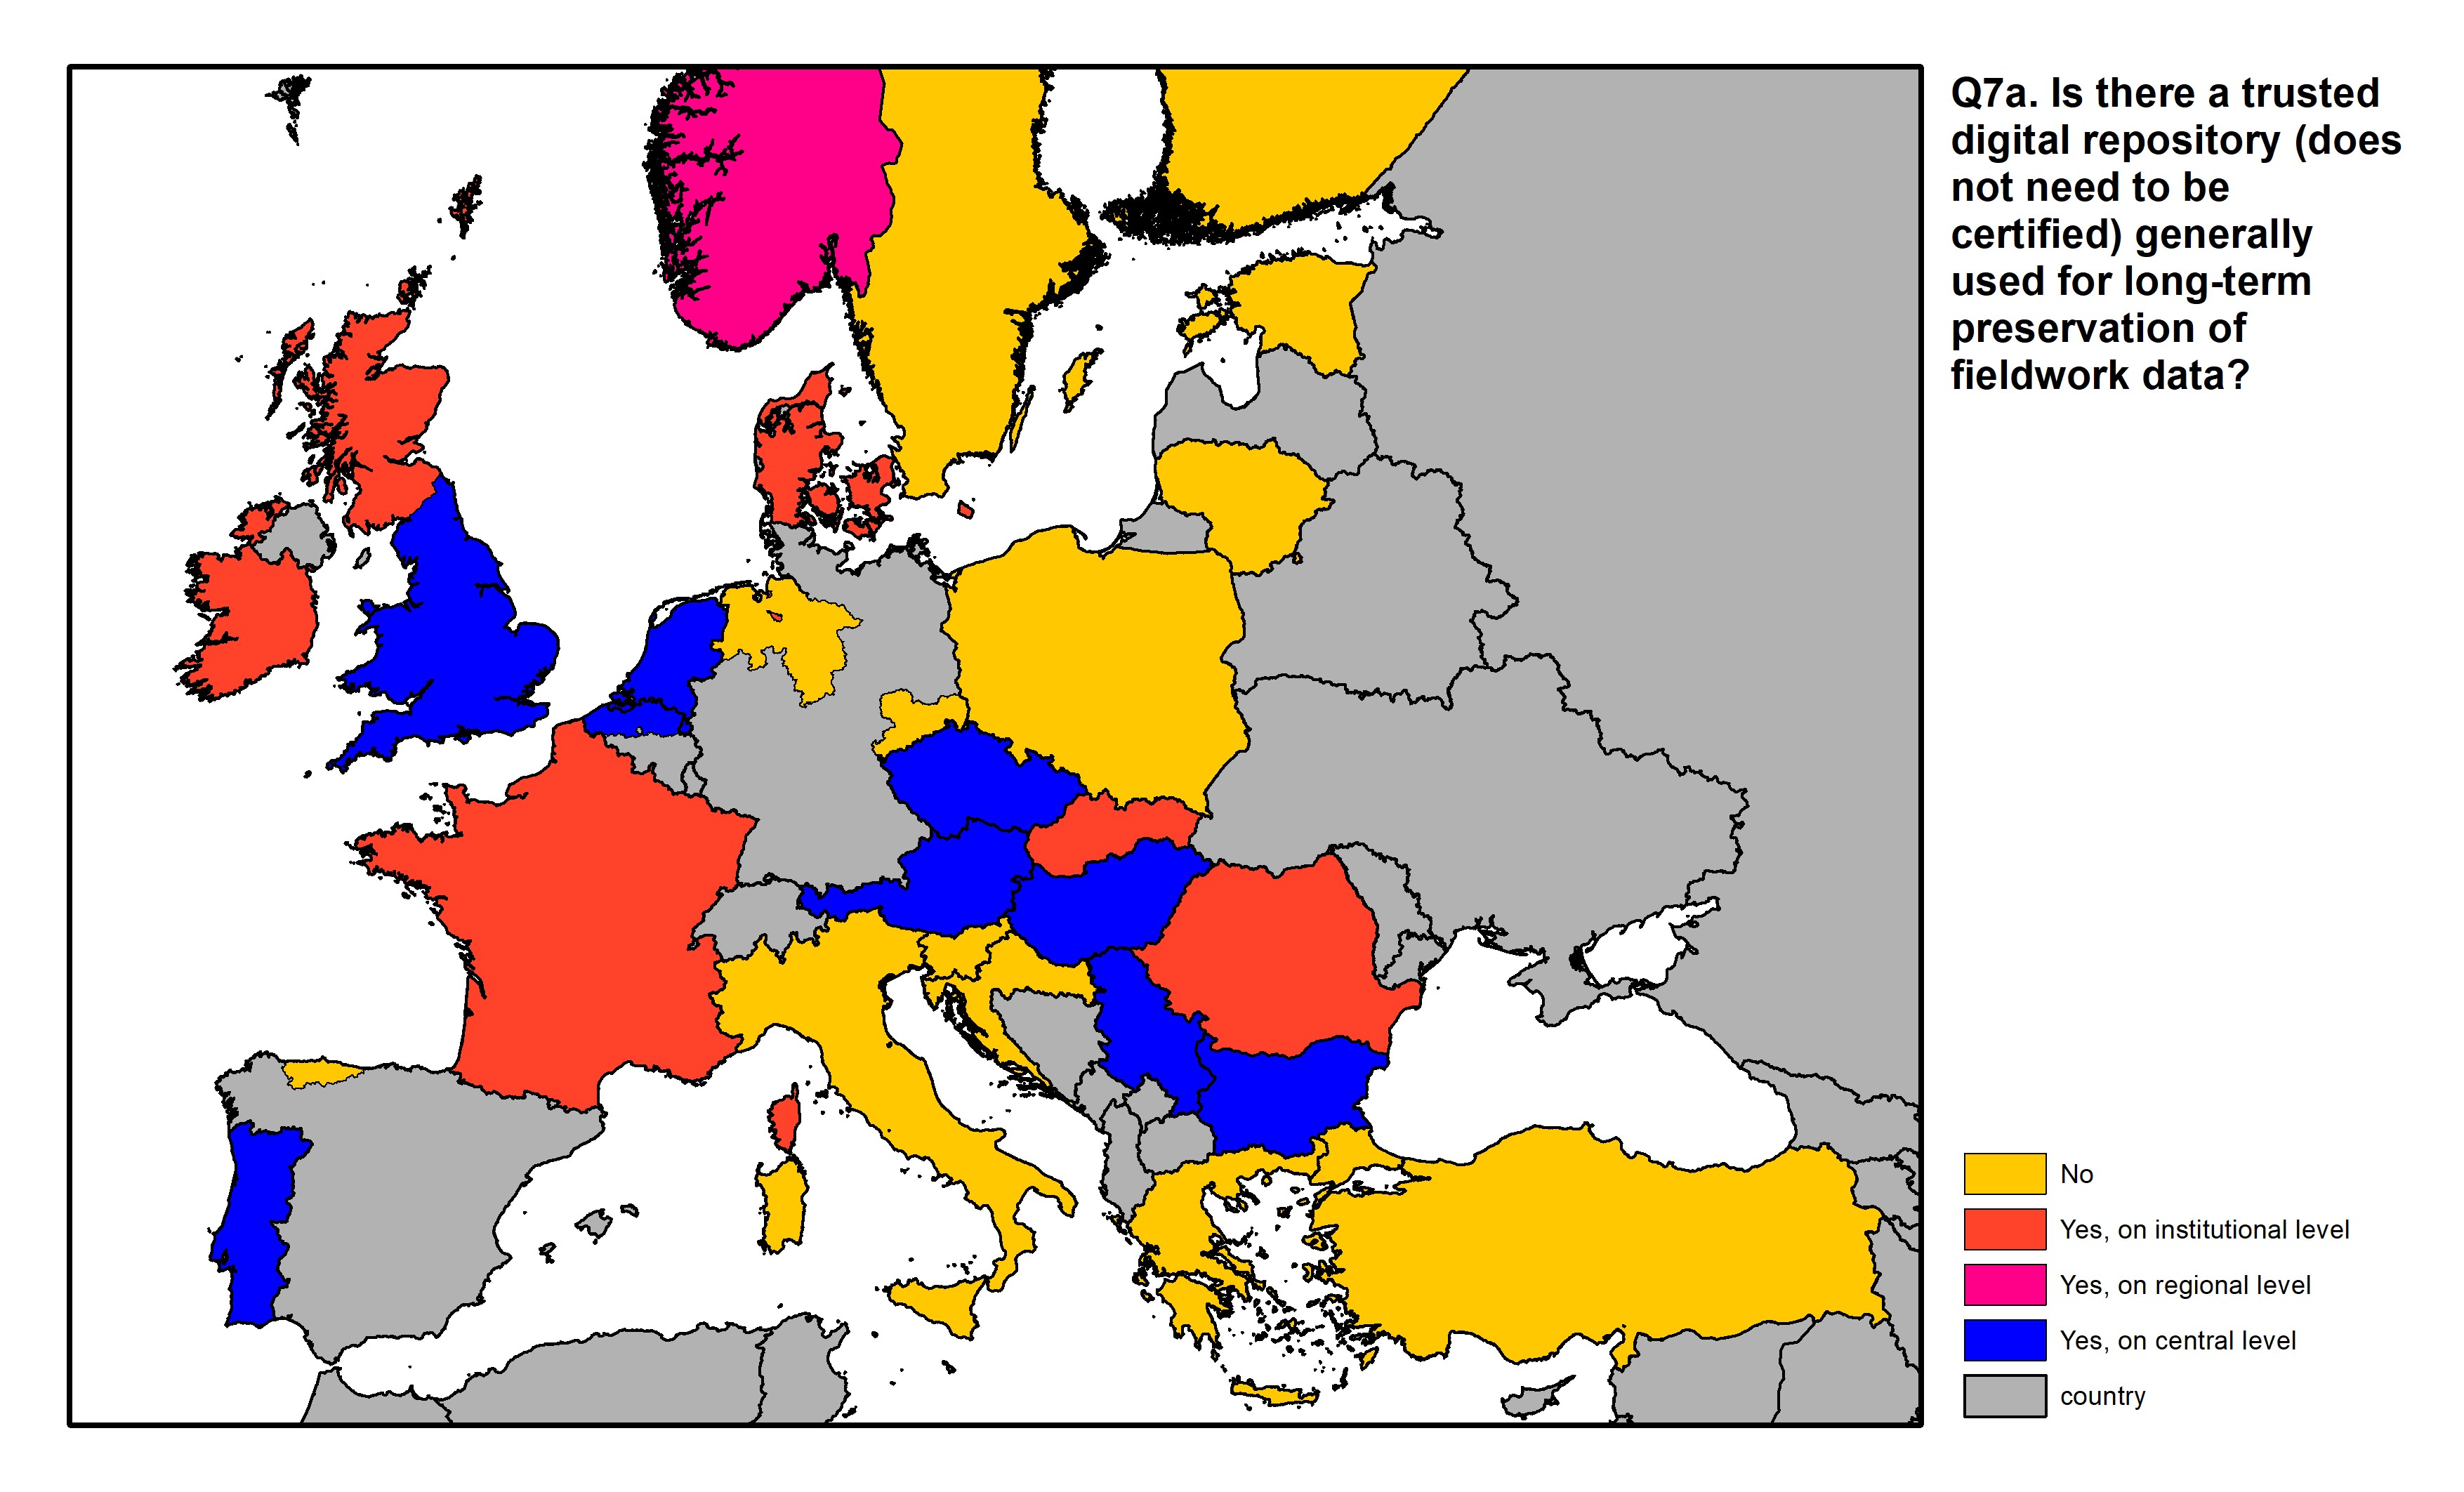 Figure 21: a map of Europe showing countries and regions in colour based on response rates to the survey question.